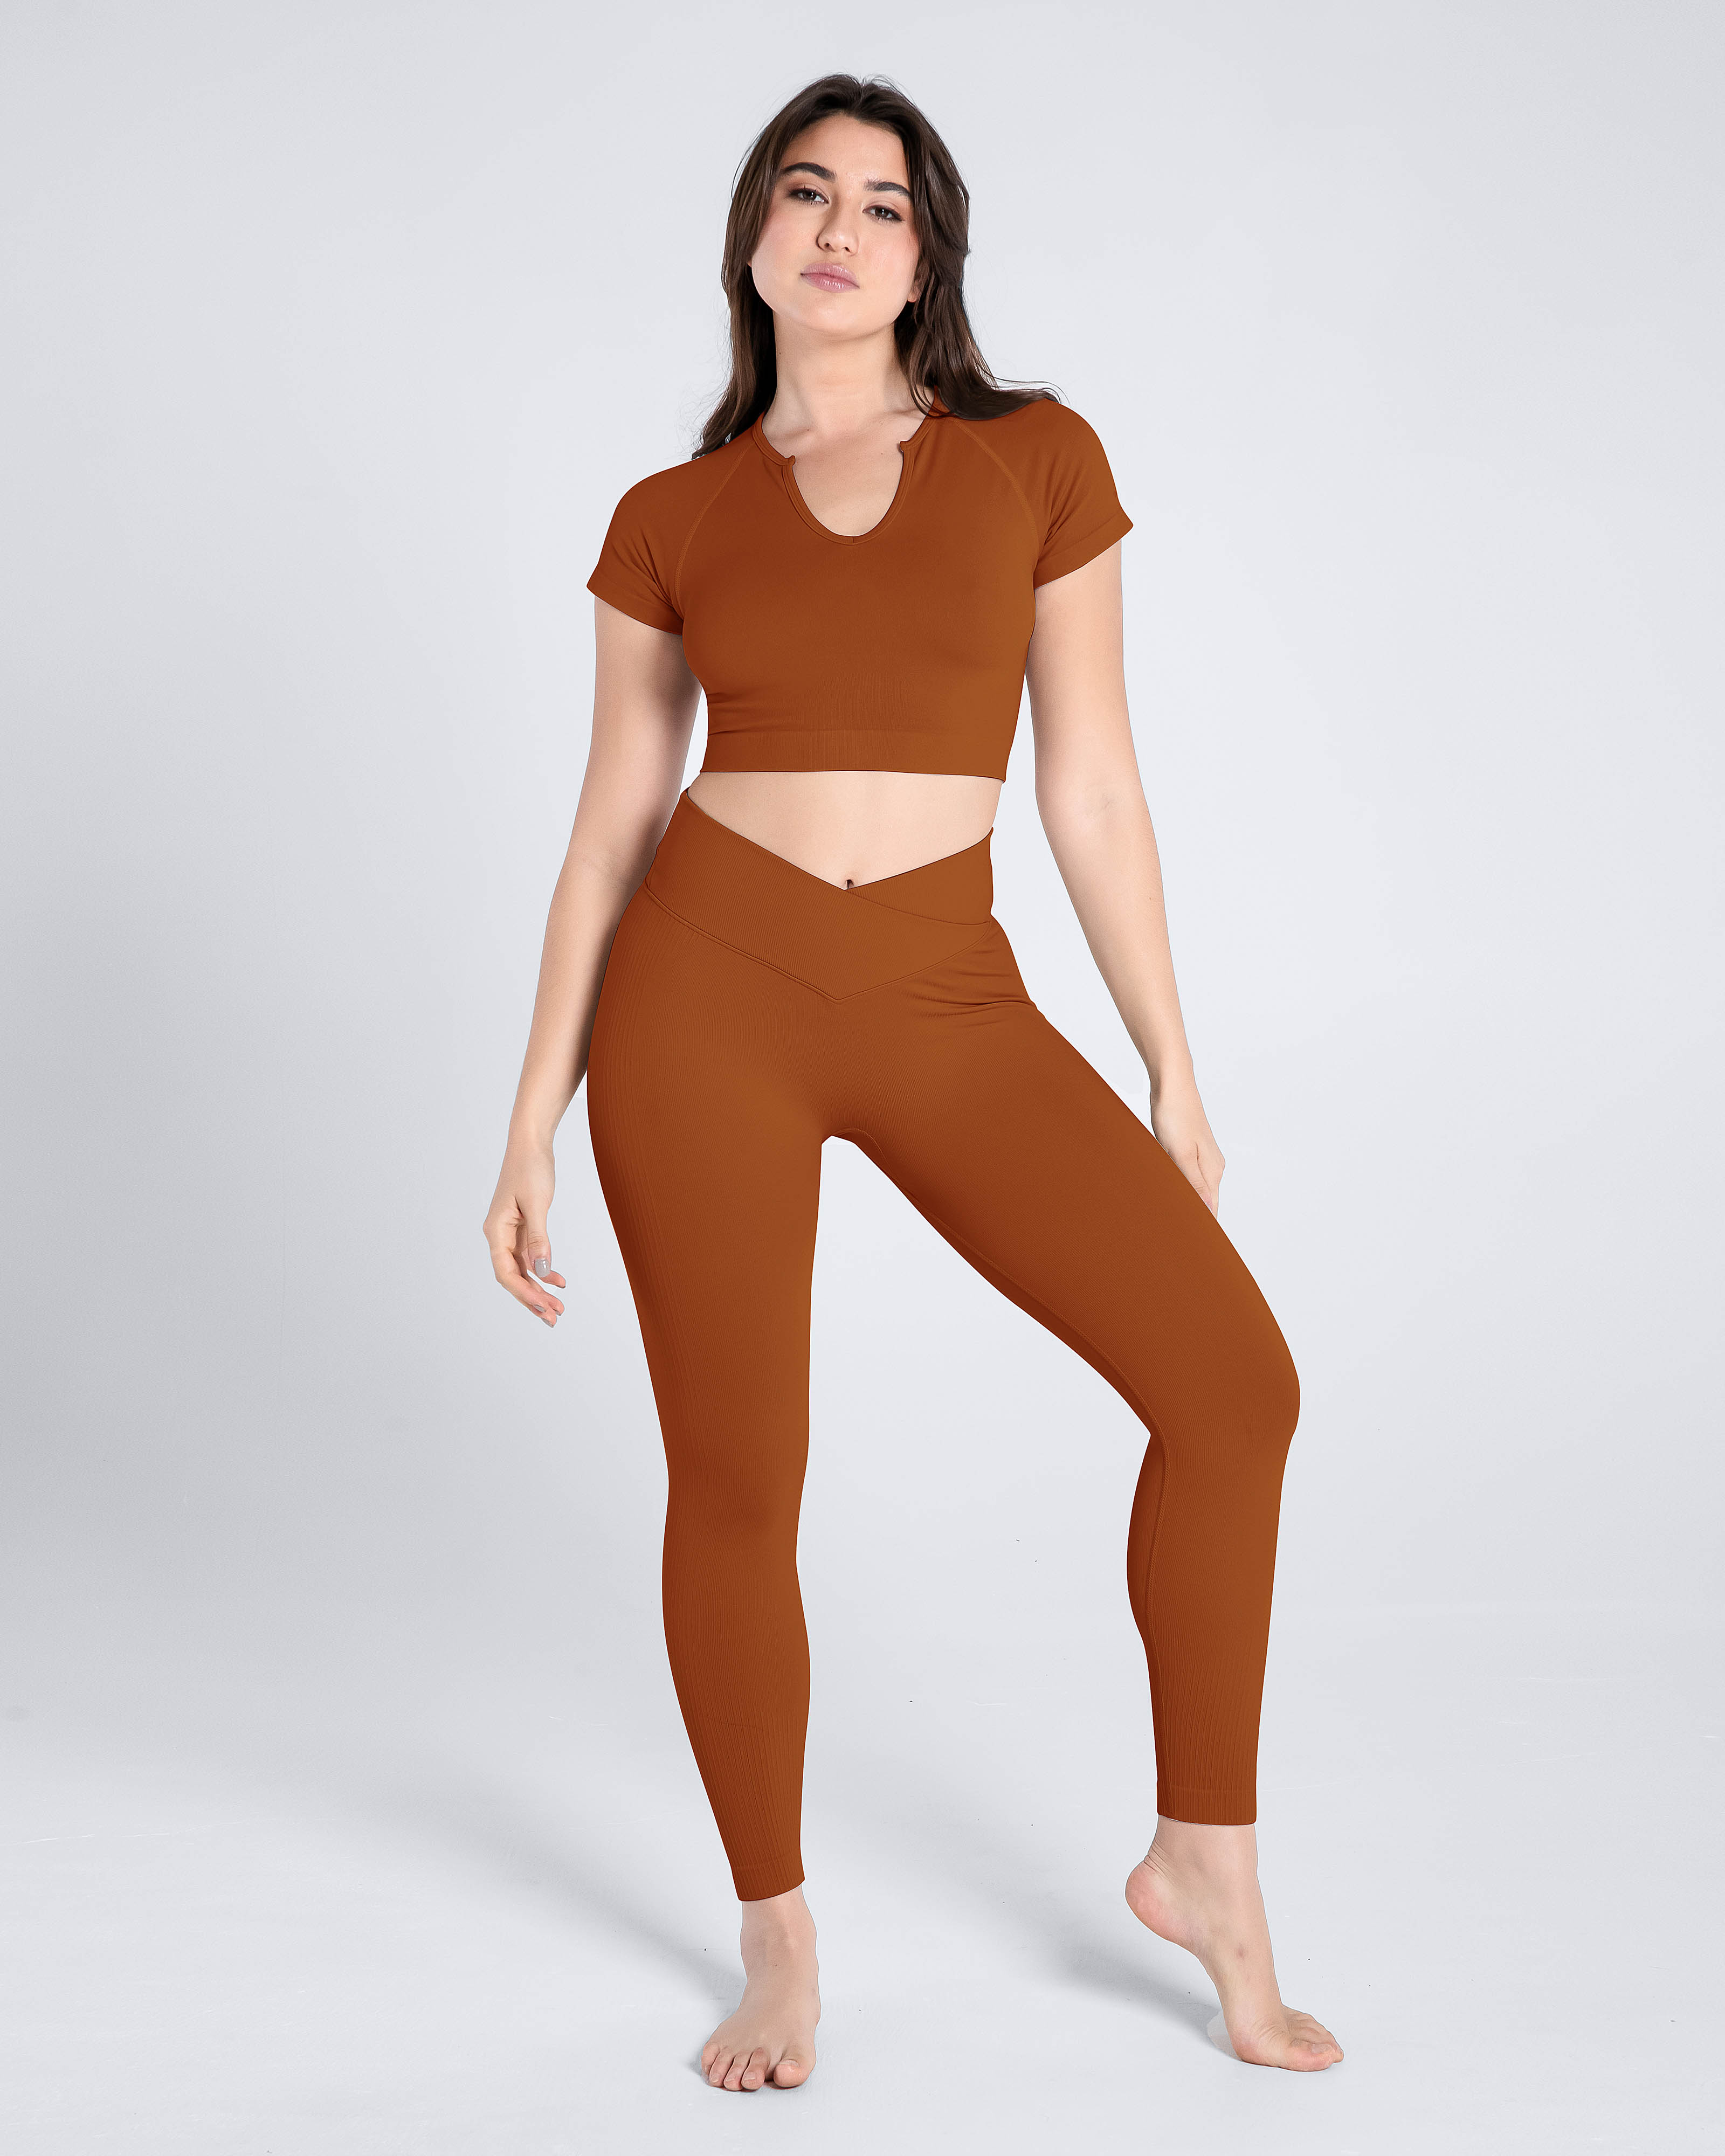 The Best Sportswear Set Available On Cosmolle, Cosmochics